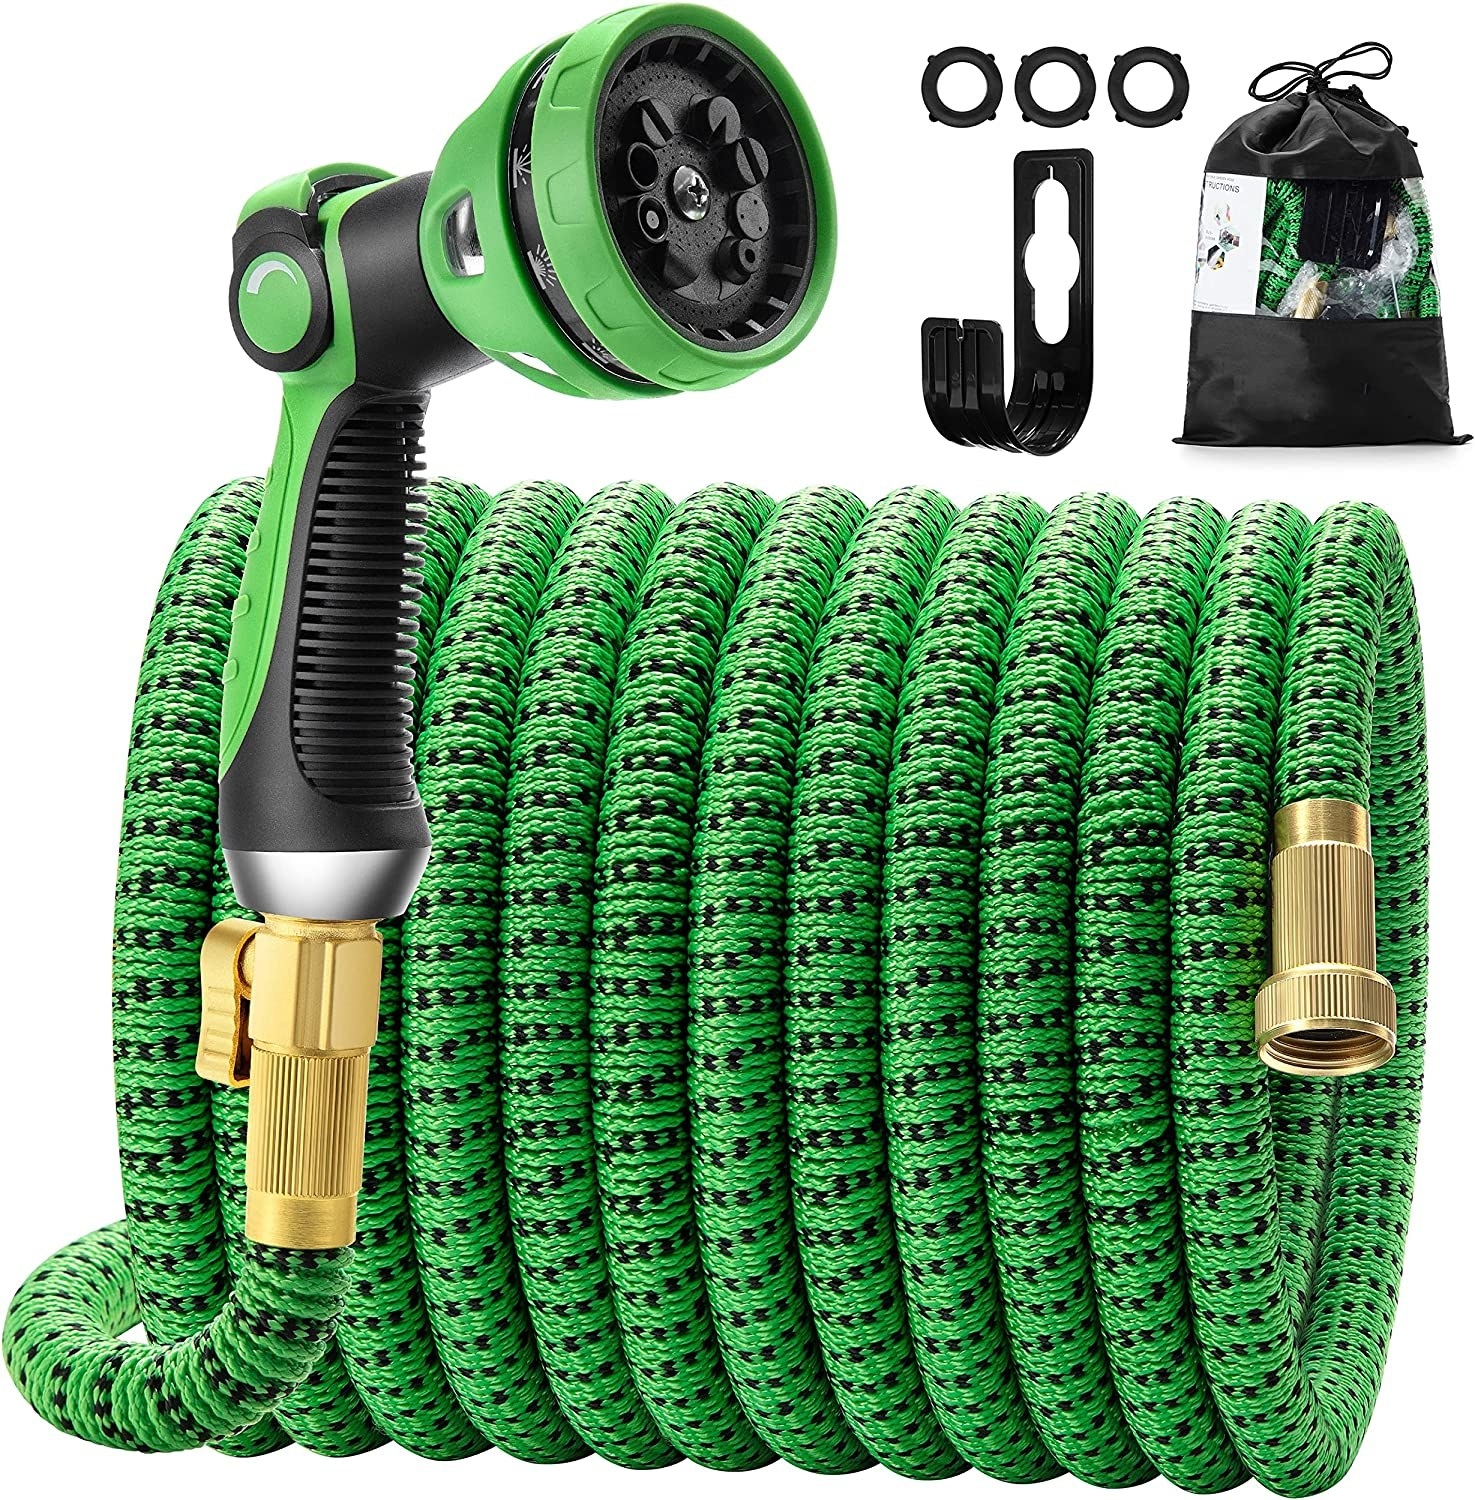 the hose rolled up next to its accessories on a blank background